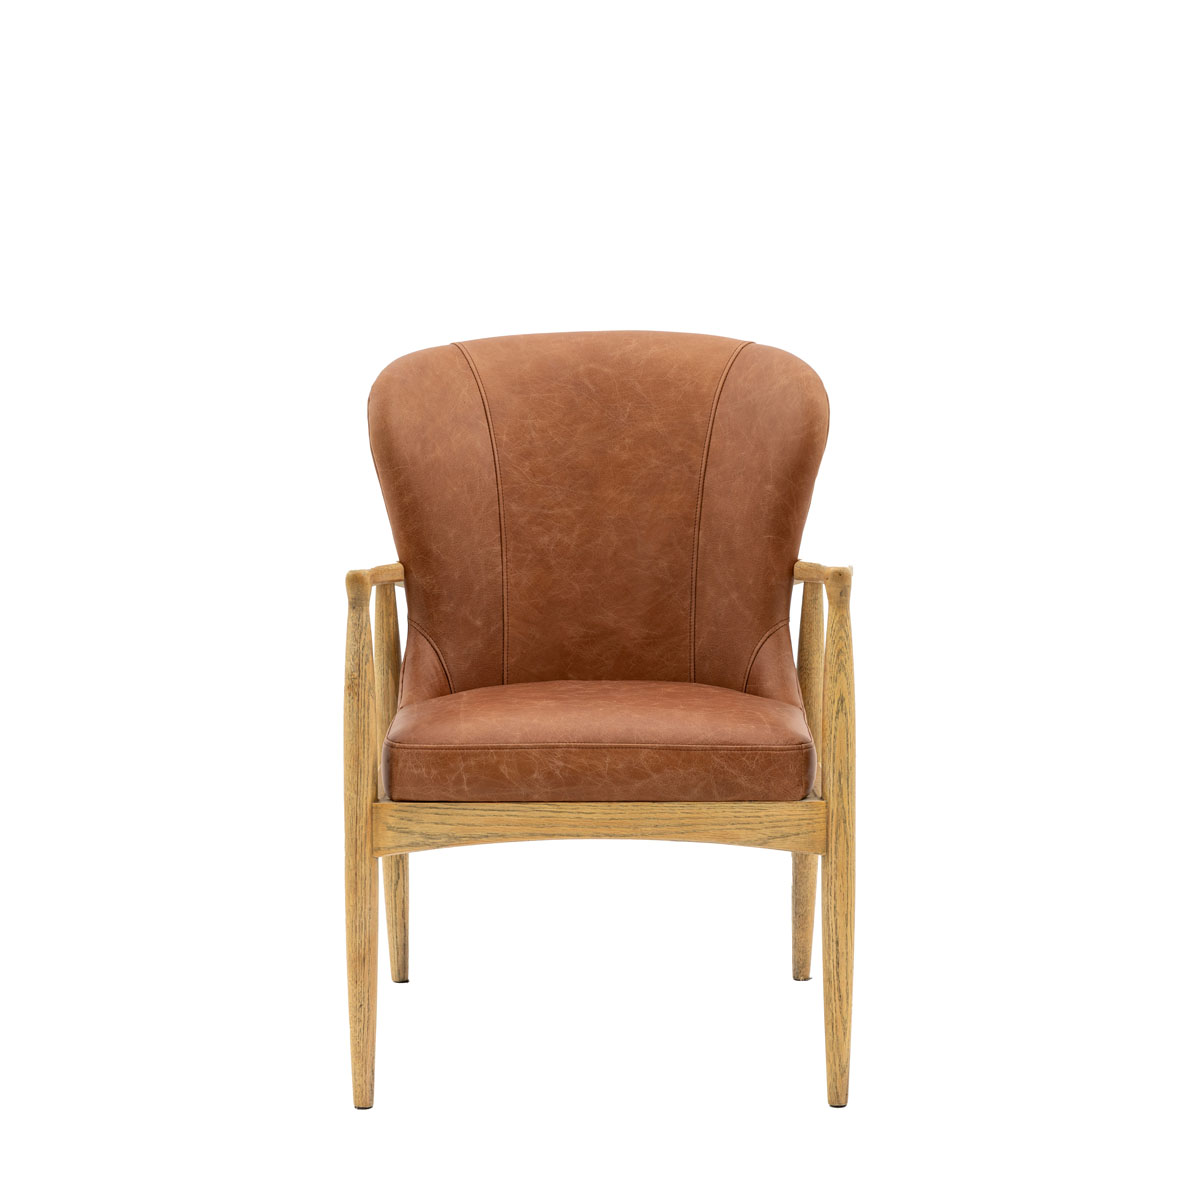 Tariva Armchair Ant Brown Leather 670x640x900mm